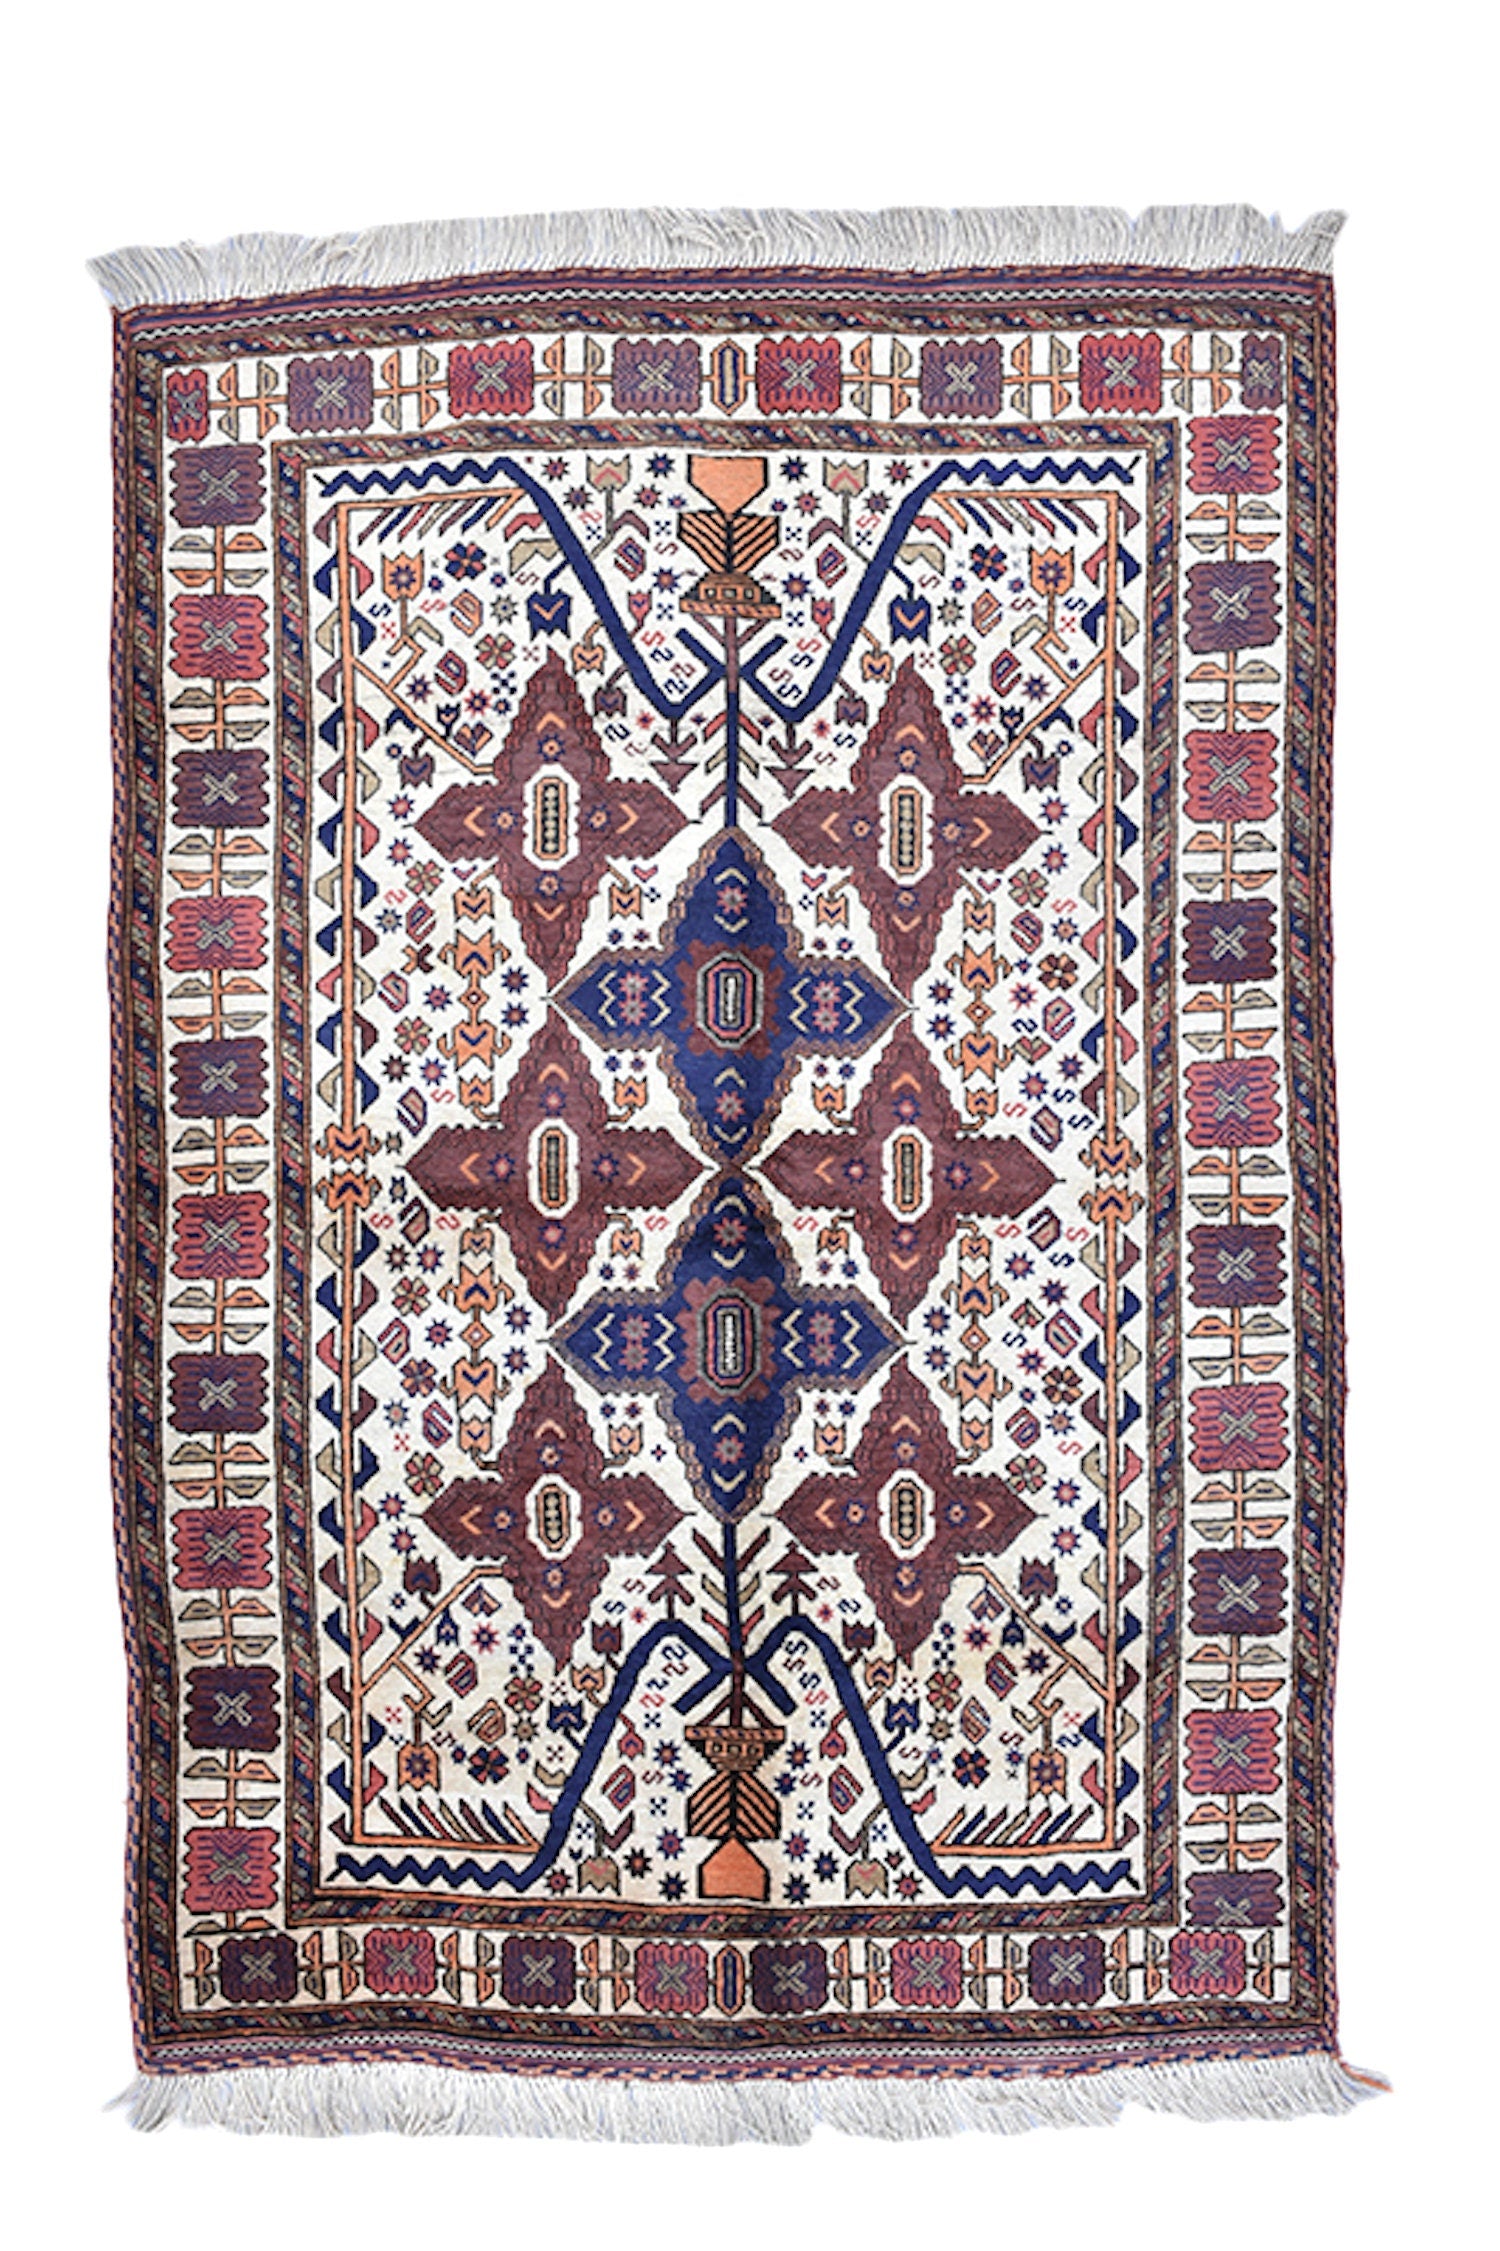 White Hand Knotted 4x6 Rug with Blue and Red Geometric Patterns | Antique Persian Turkish Wool Rectangle Rug